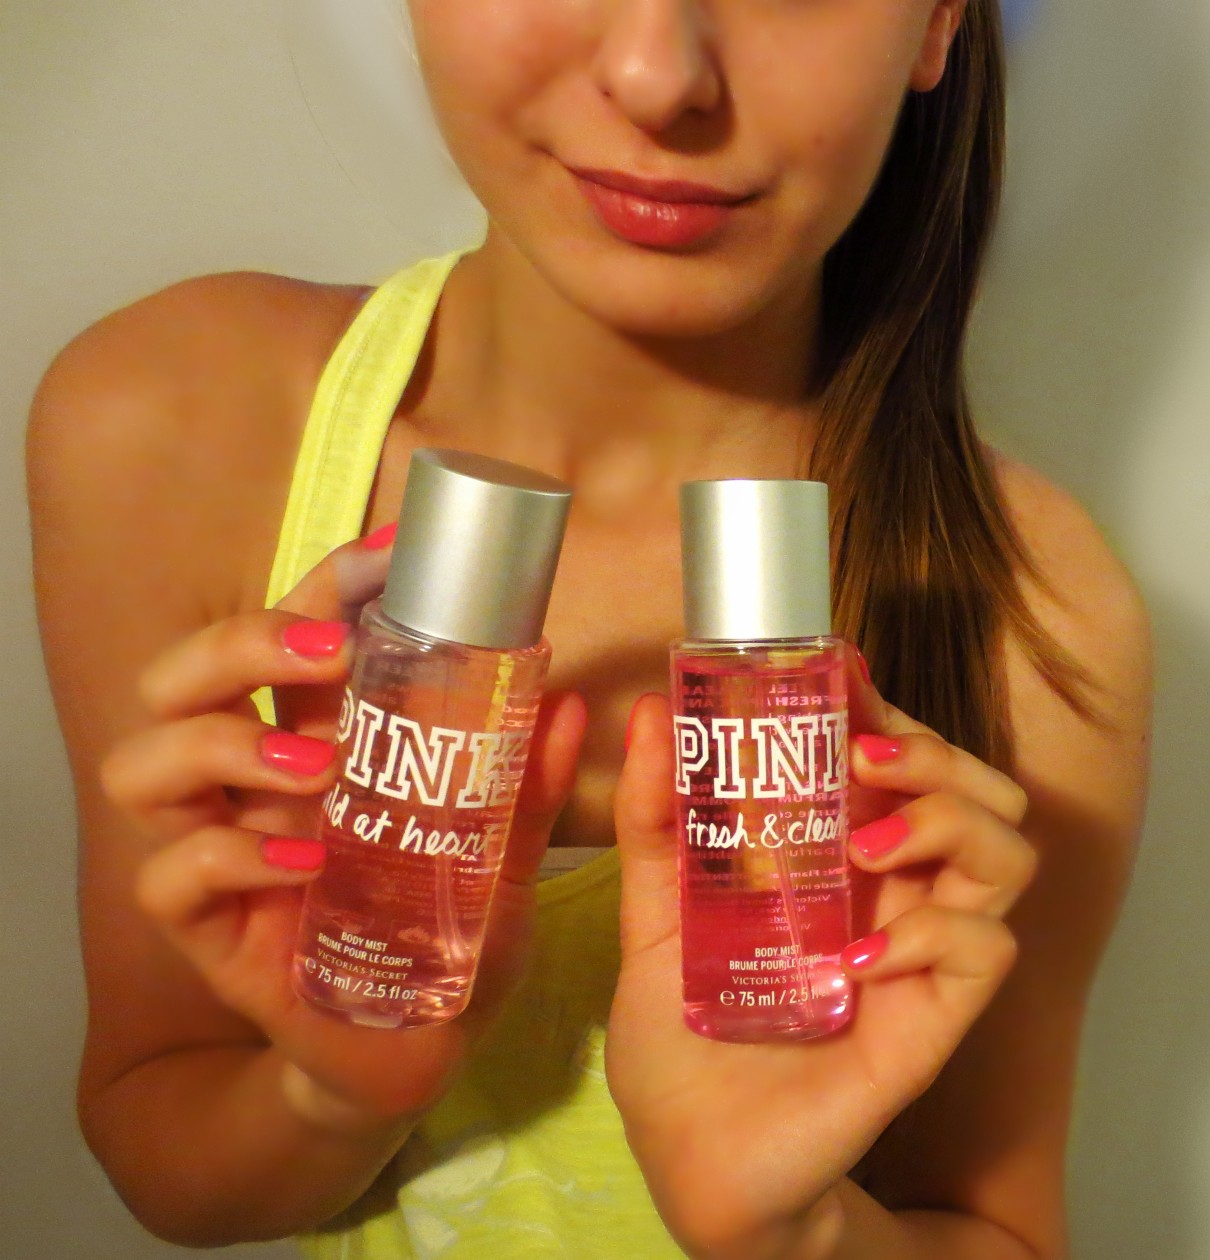 victoria secret fresh and clean body mist review